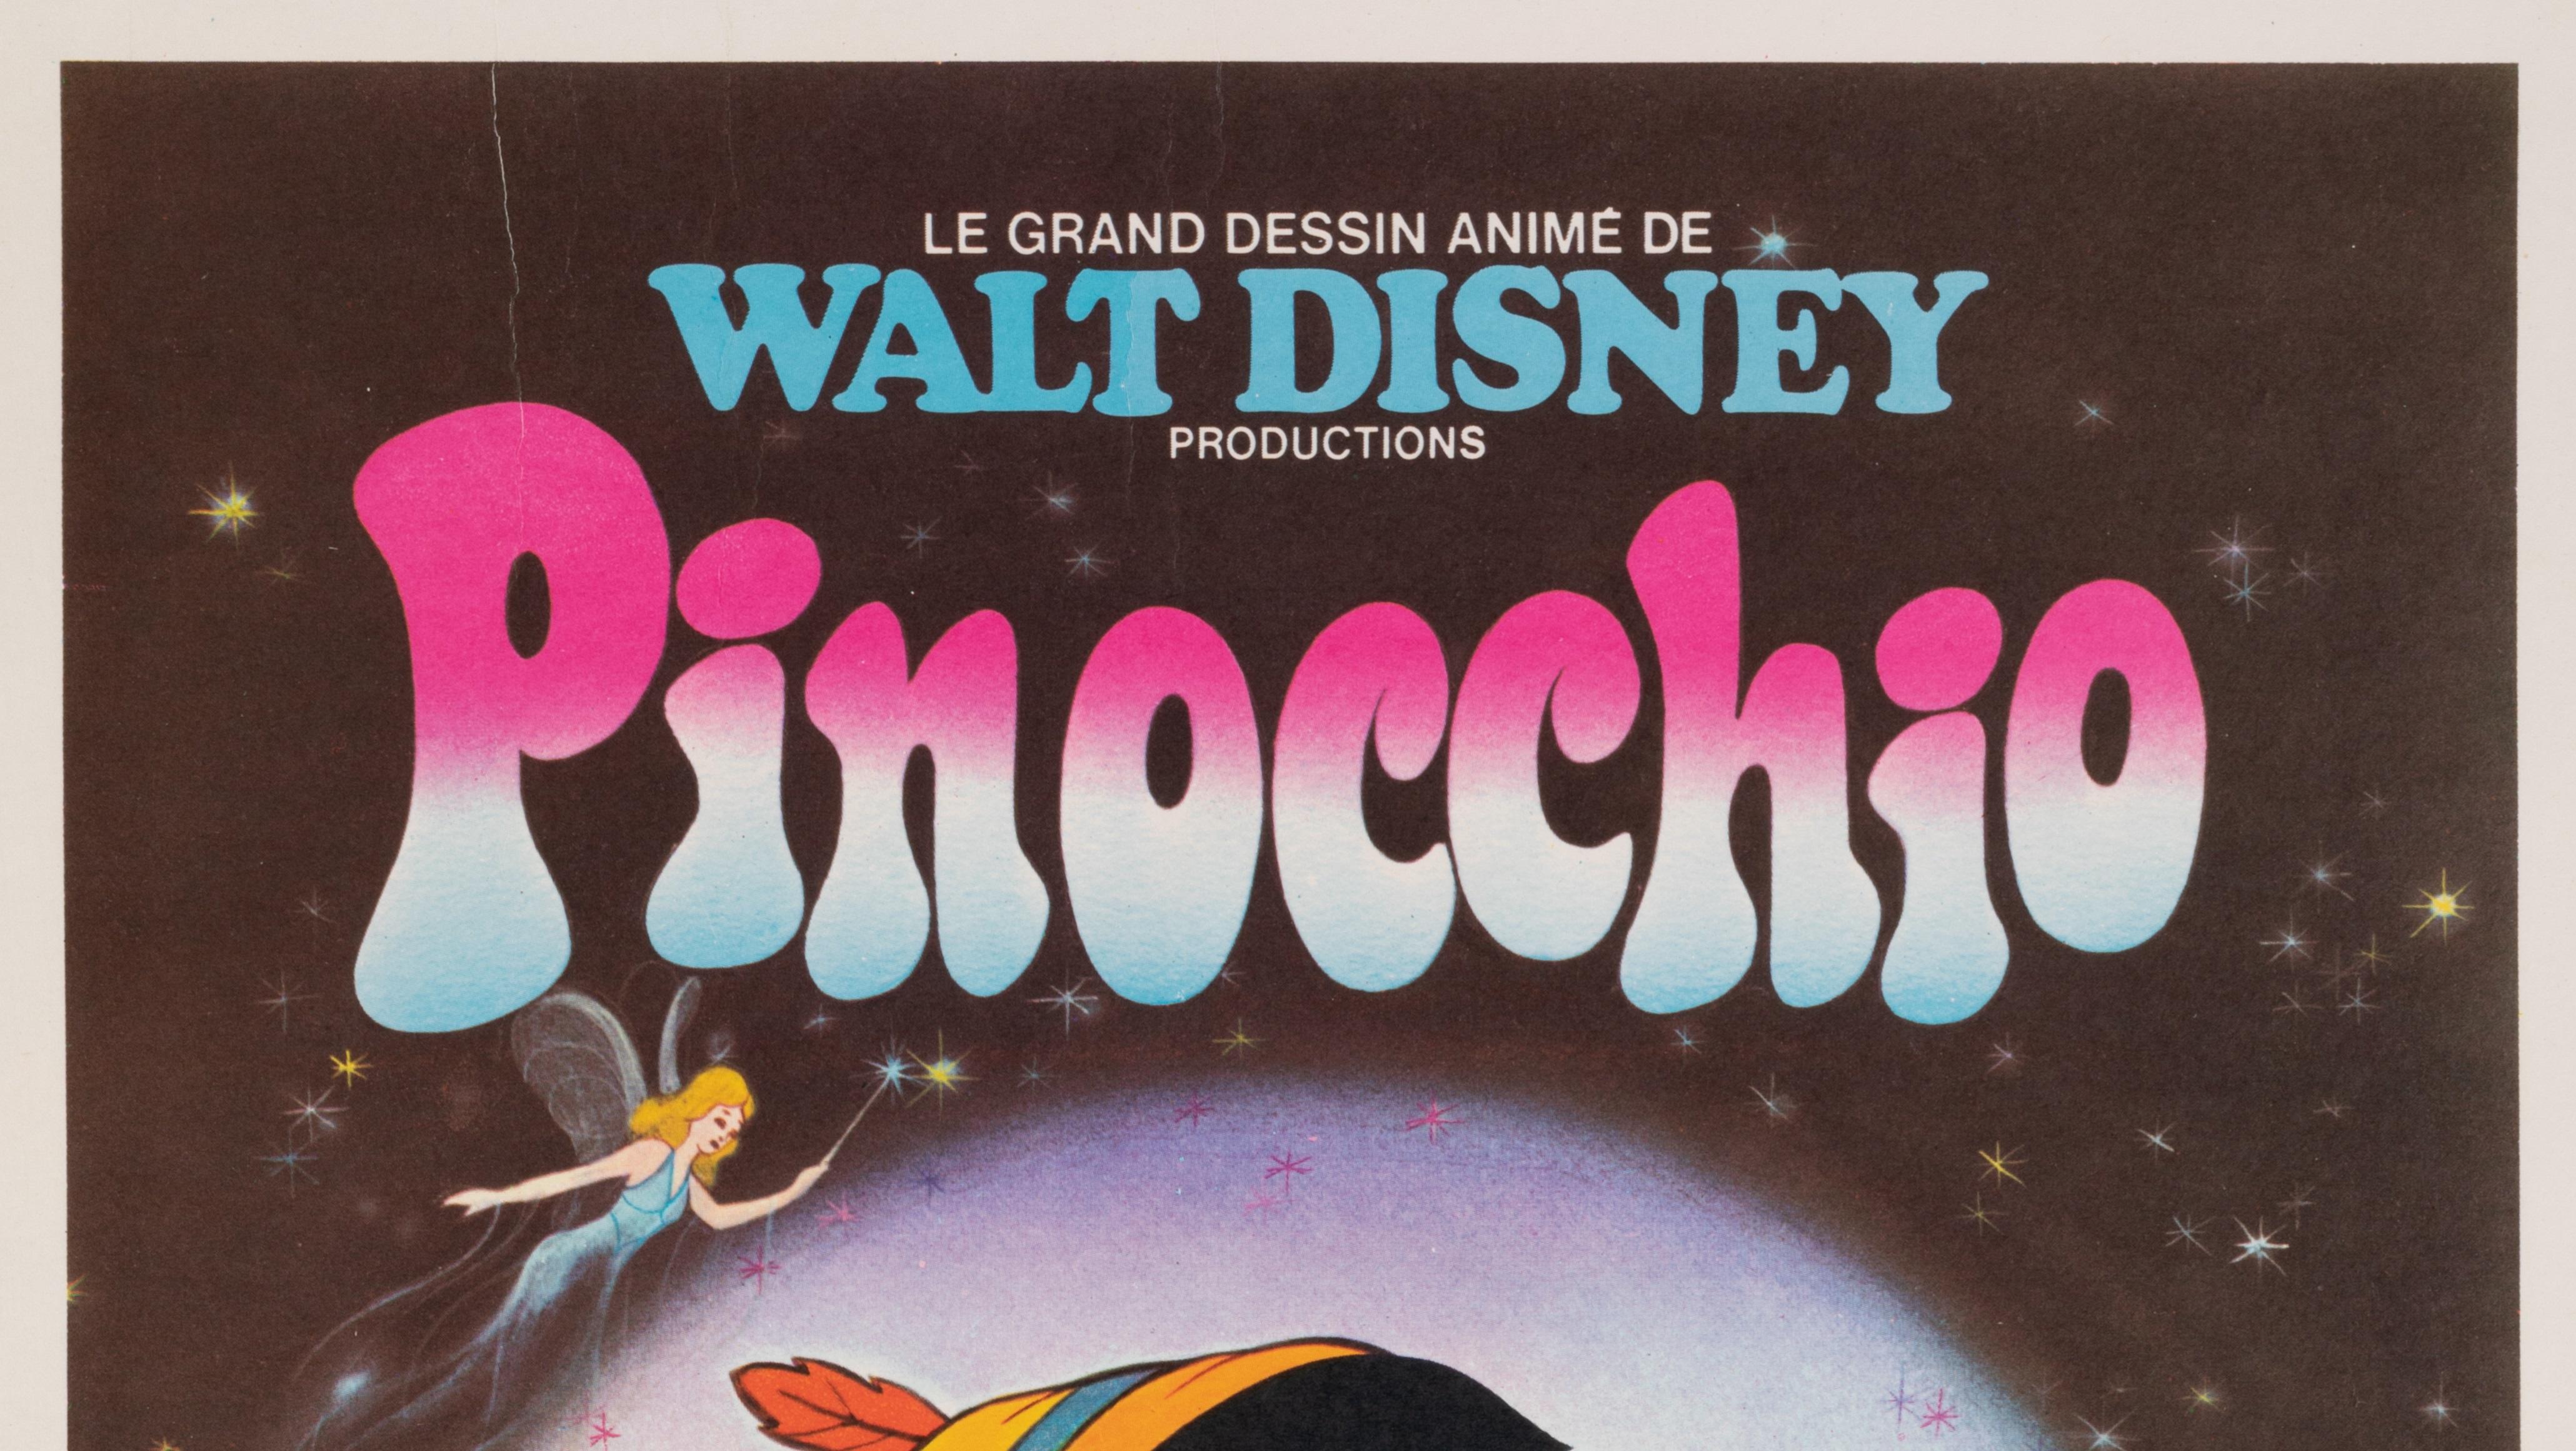 Walt Disney poster to promote the cartoon Pinocchio from 1980.

Artist: Anonymous
Title: Pinocchio
Date: circa 1980
Size (w x h): 15.7 x 21.7 in / 40 x 55 cm
Printer: Ets St martin Imp, 92 Asnieres
Materials and Techniques: Colour lithograph on